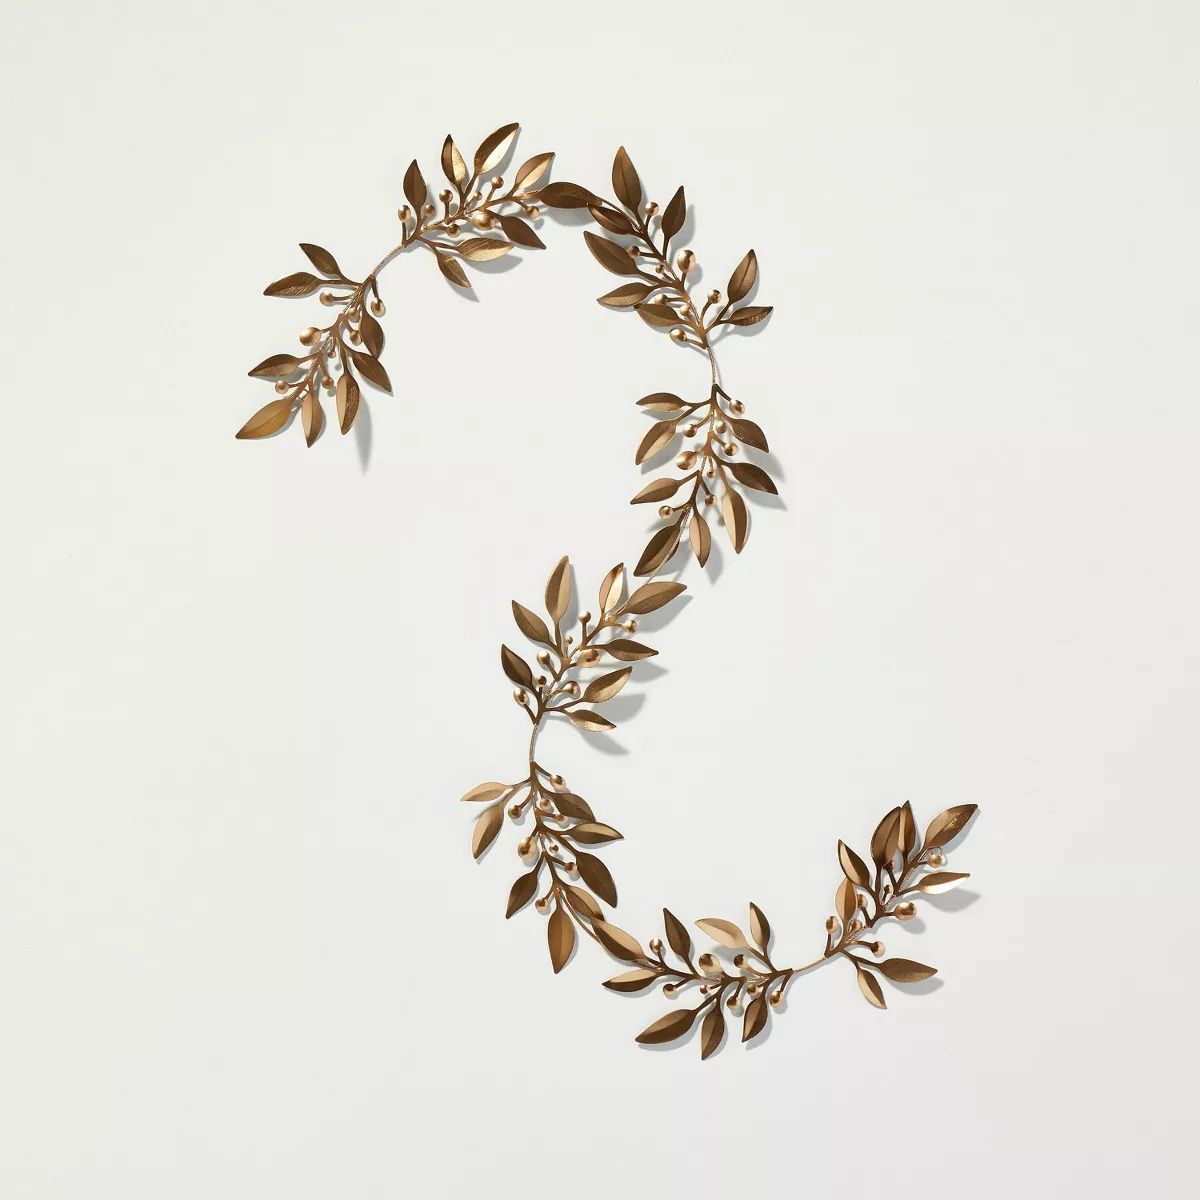 5' Decorative Metal Leaf Christmas Garland Antique Brass - Hearth & Hand™ with Magnolia | Target